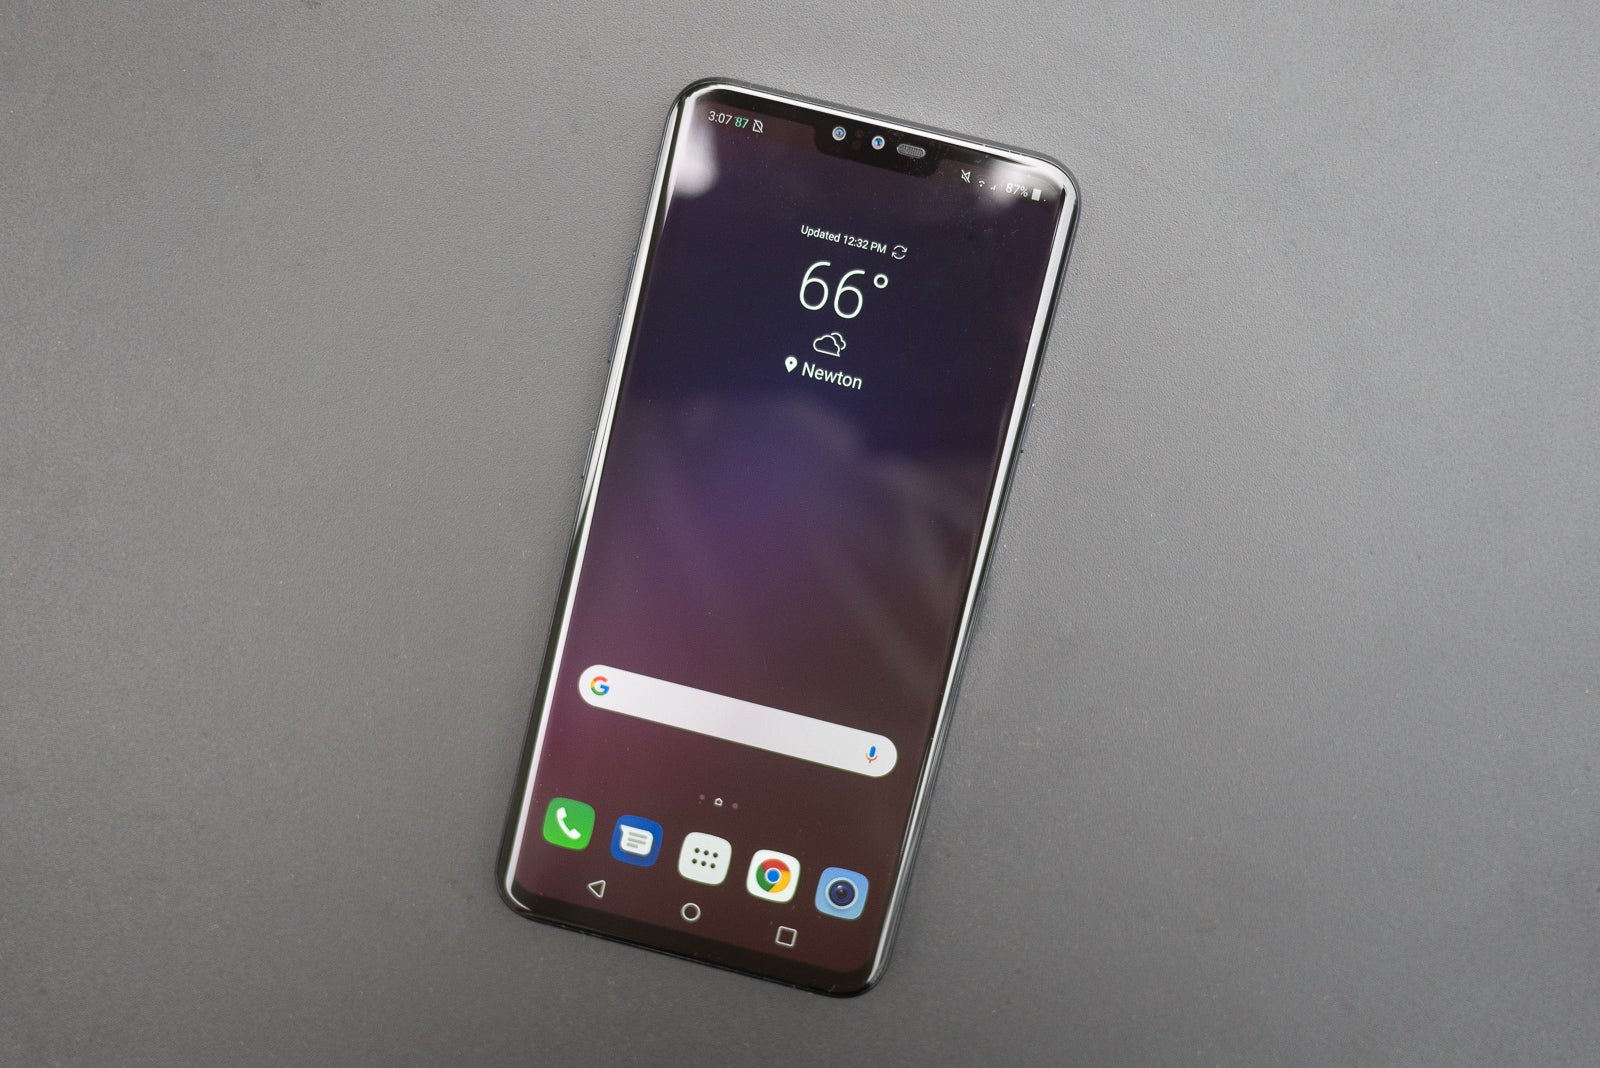 Best deals on LG phones right now